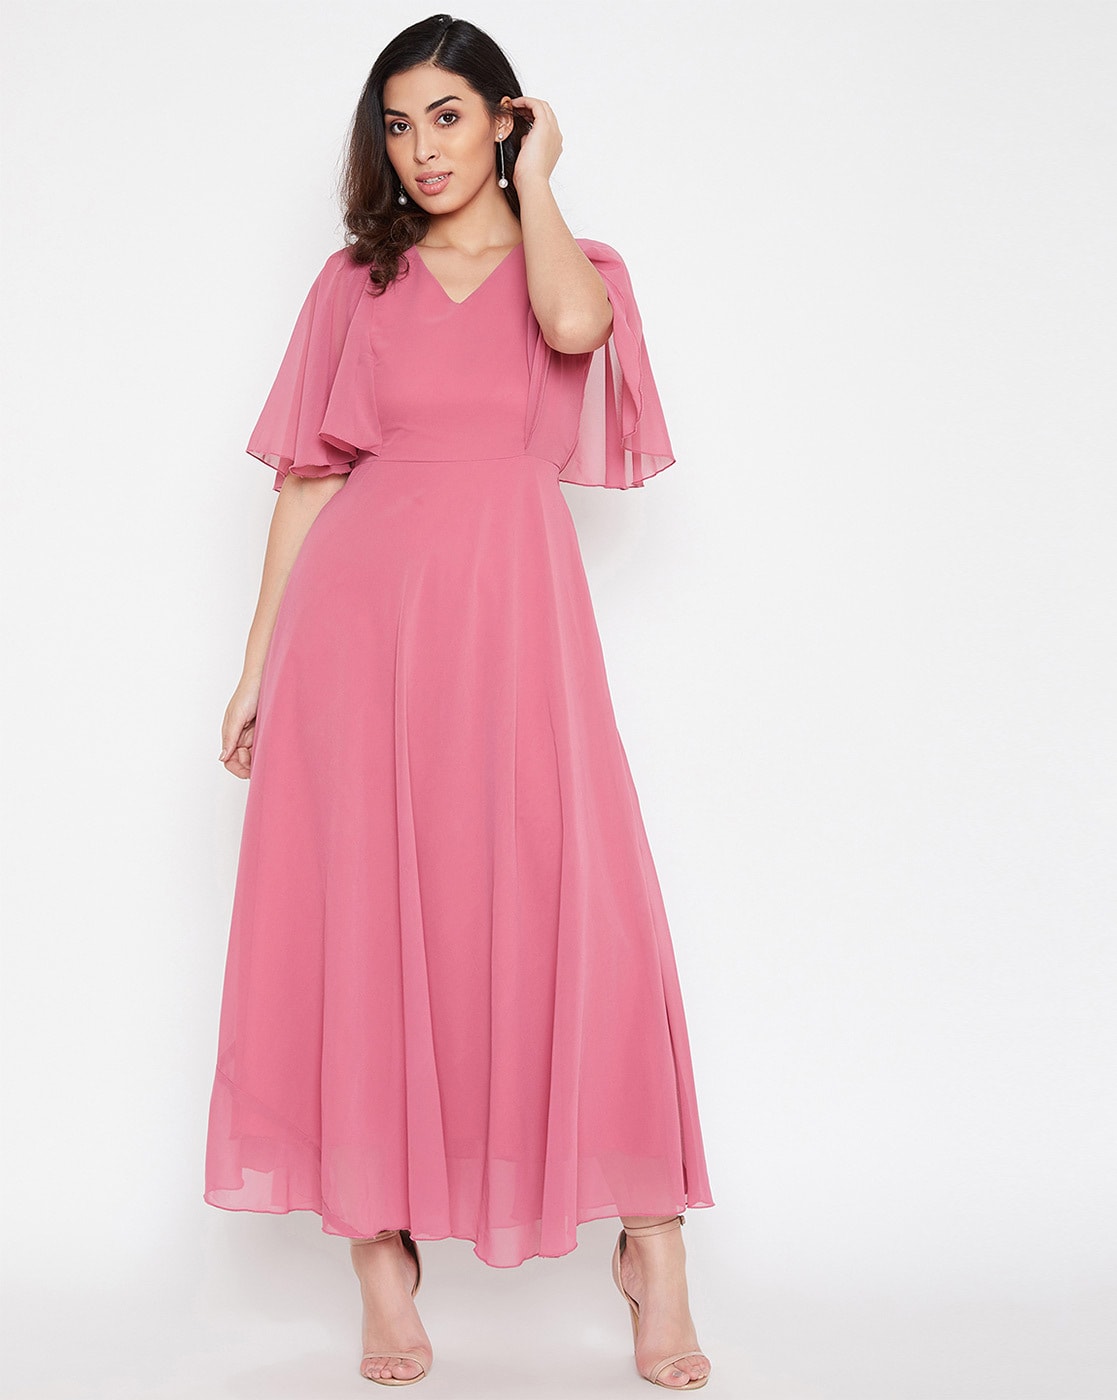 Pink Dresses for Women by HELLO DESIGN ...